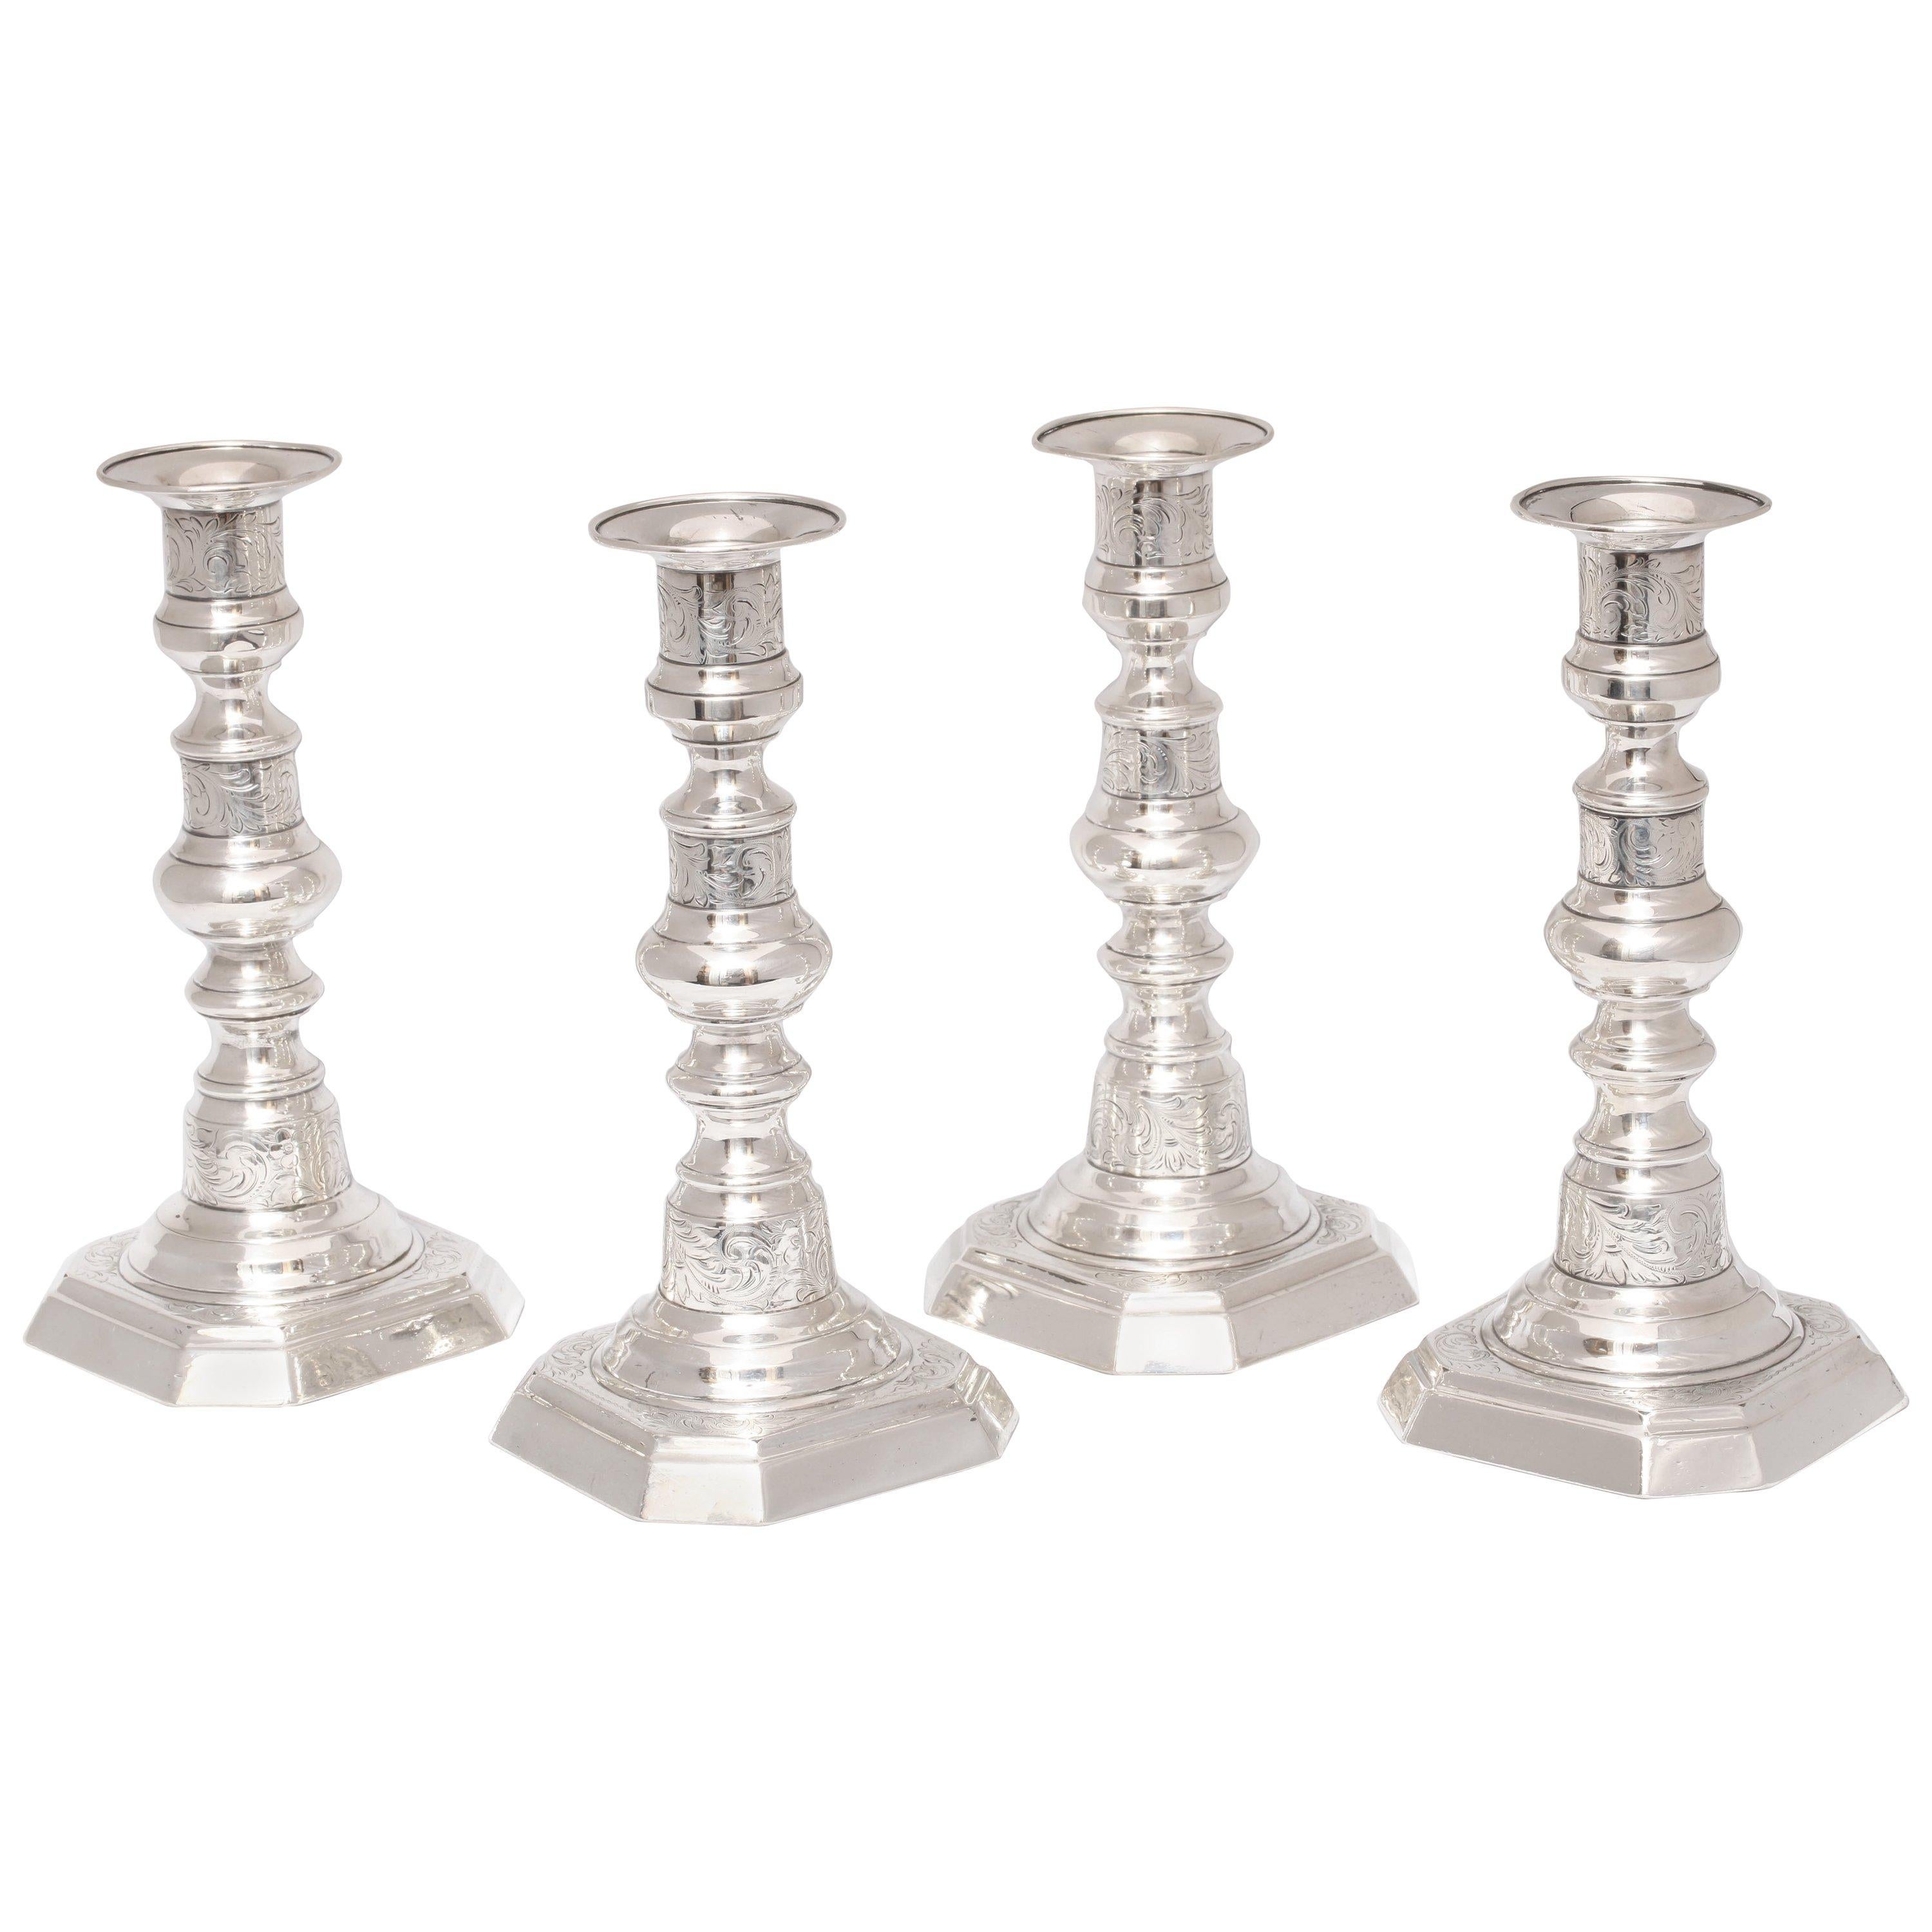 Suite of Four American Colonial Style Sterling Silver Candlesticks by Gorham